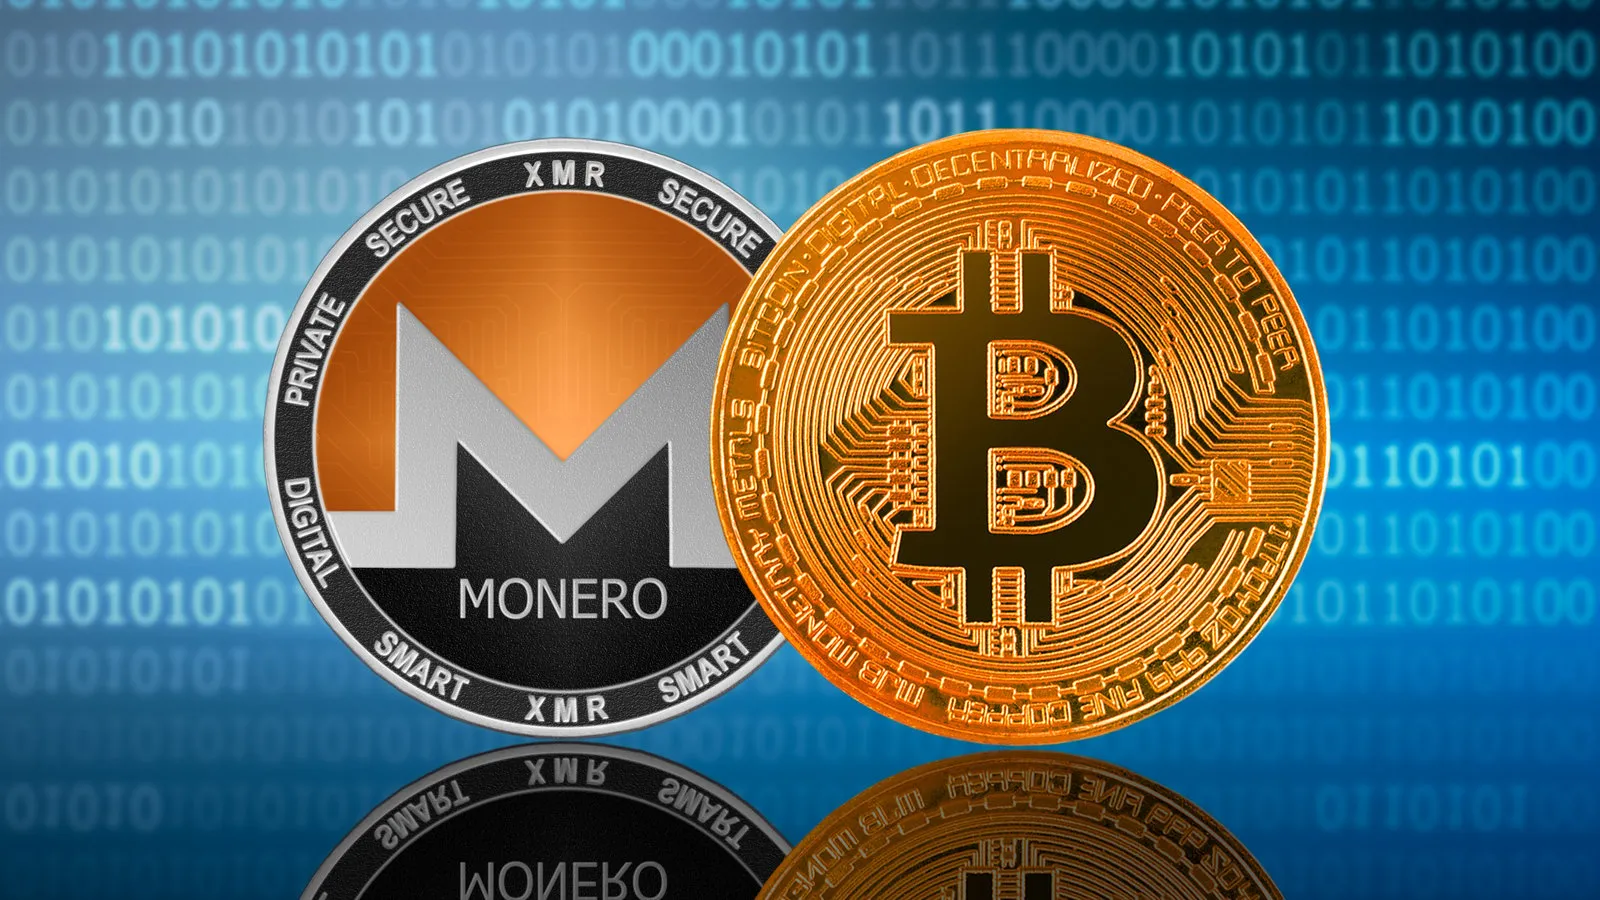 Bitcoin and Monero were both used to fund far-right extremist groups in the U.S. Image: Shutterstock